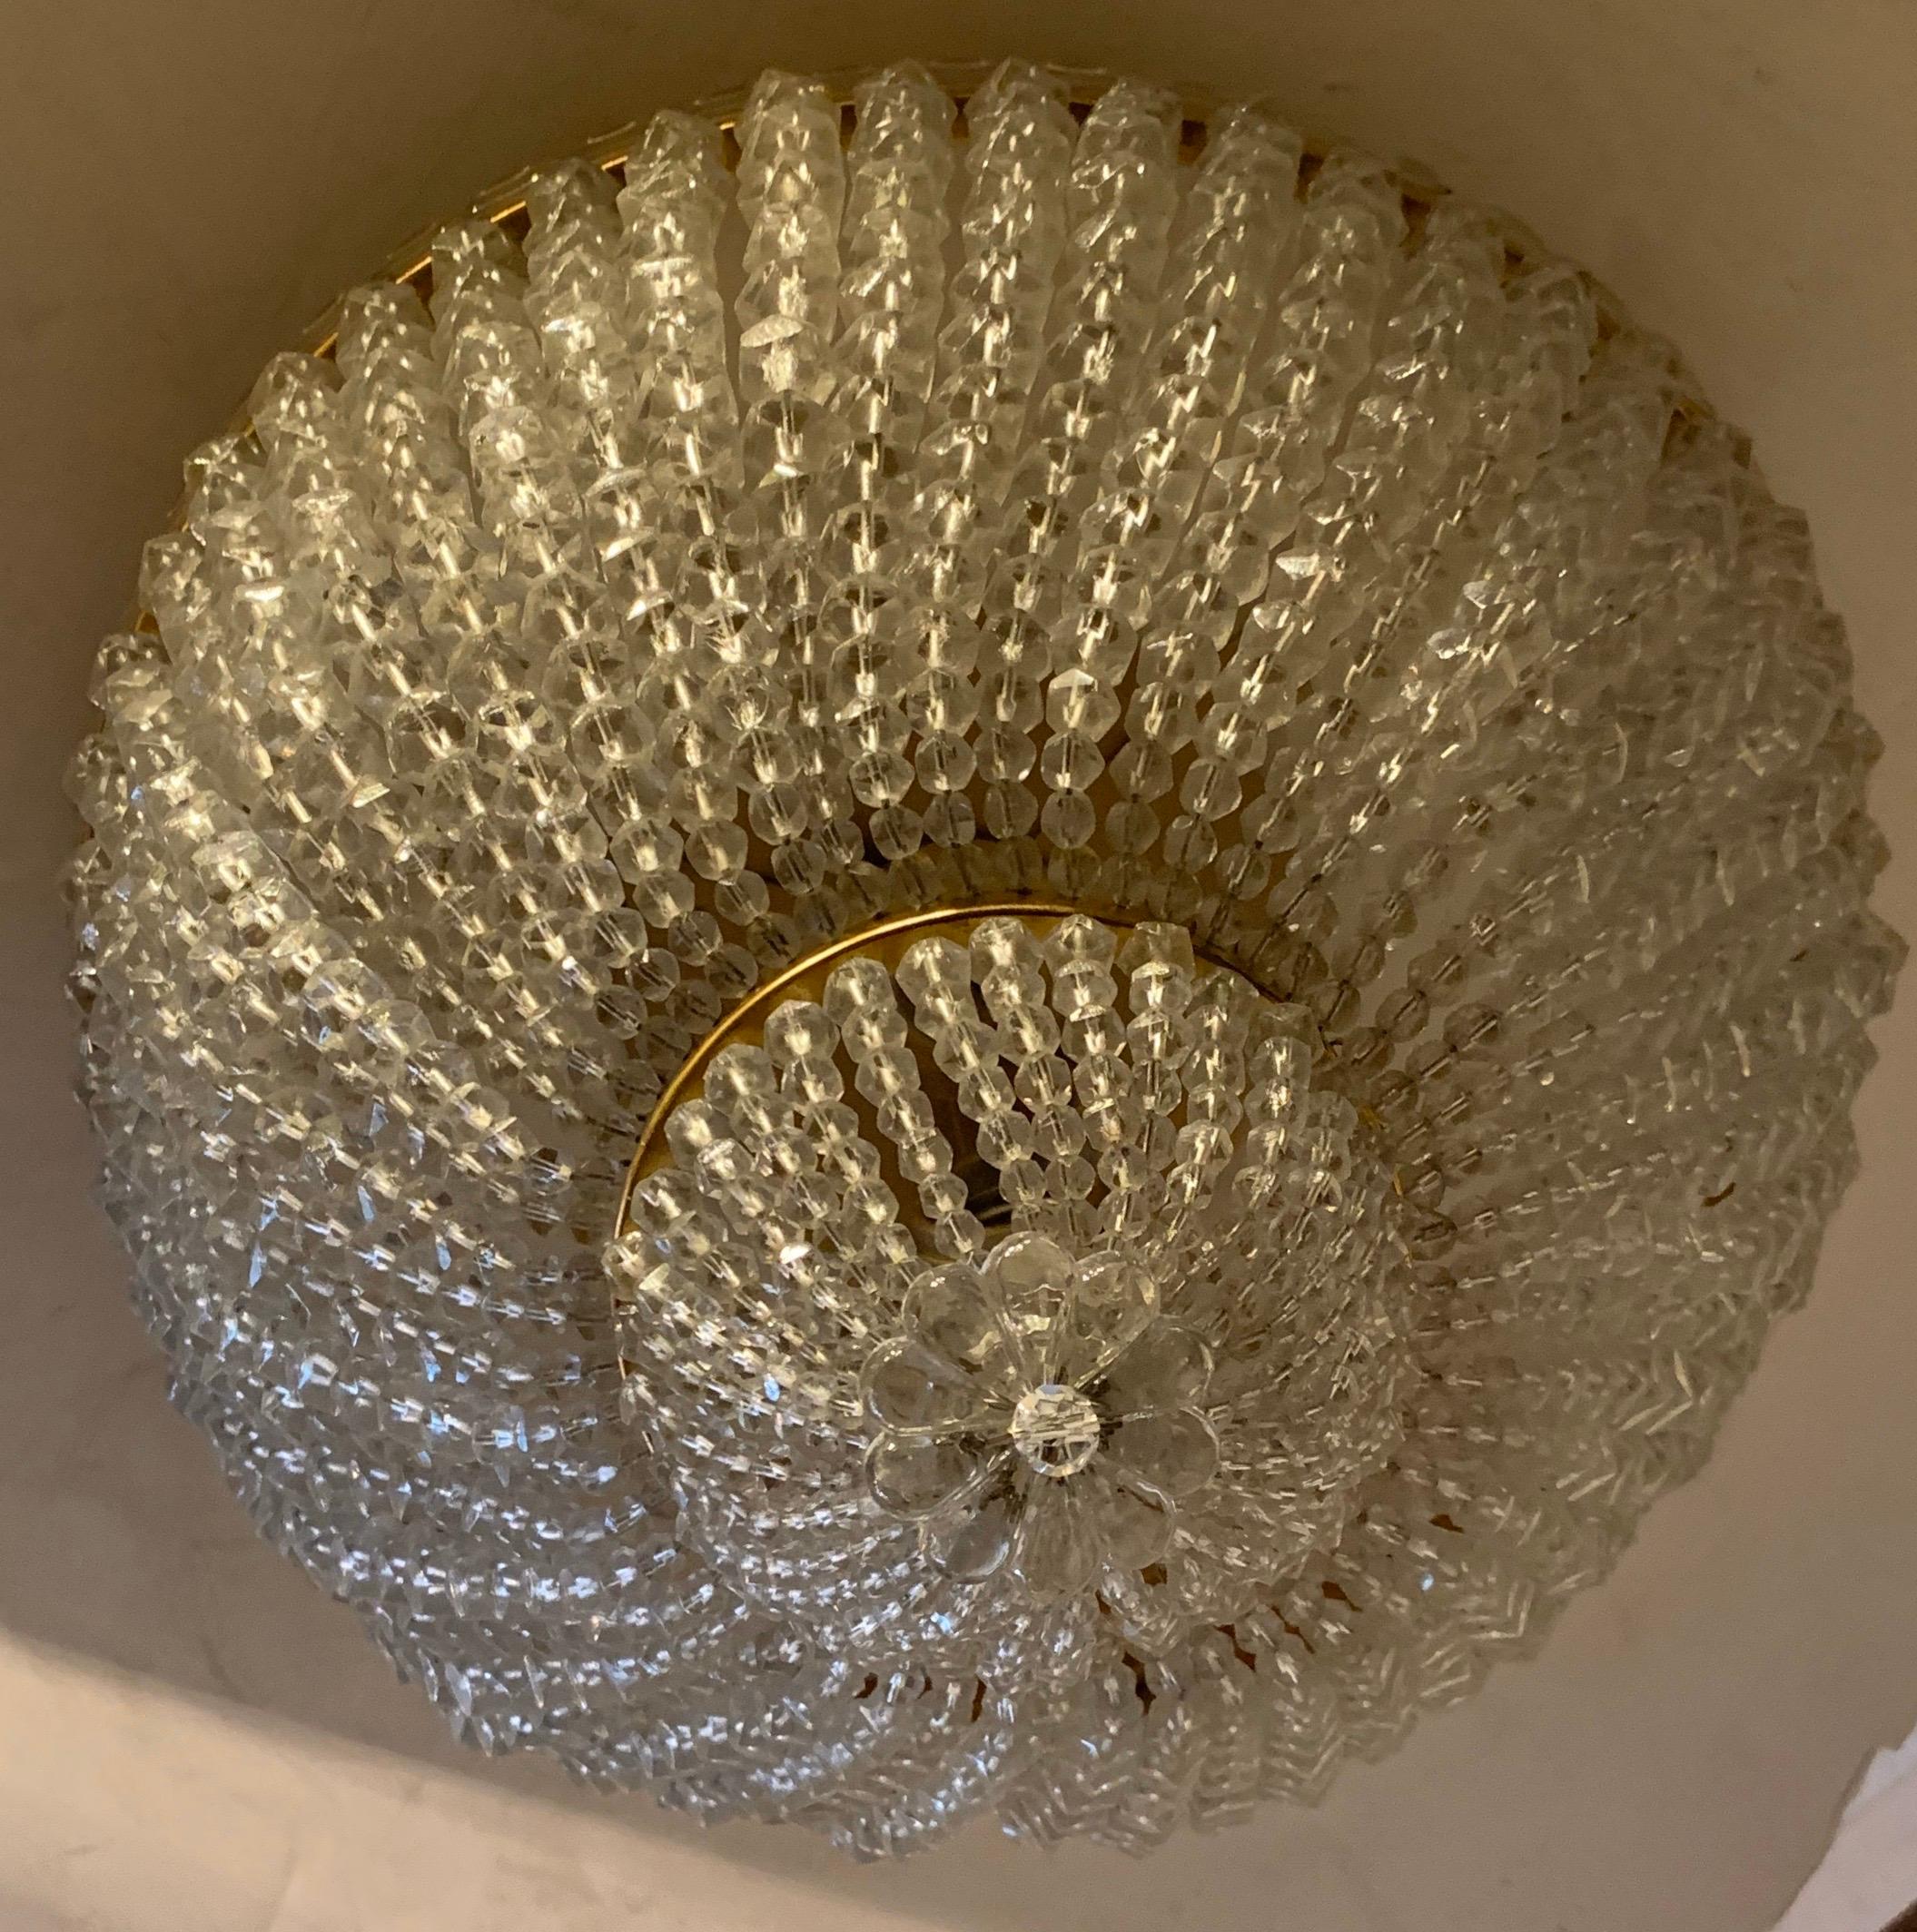 A wonderful set of 4 beaded crystal basket form flush mount brass ceiling light fixtures with a candelabra socket in each, rewired with new sockets and ready to install. 

Each sold separately.